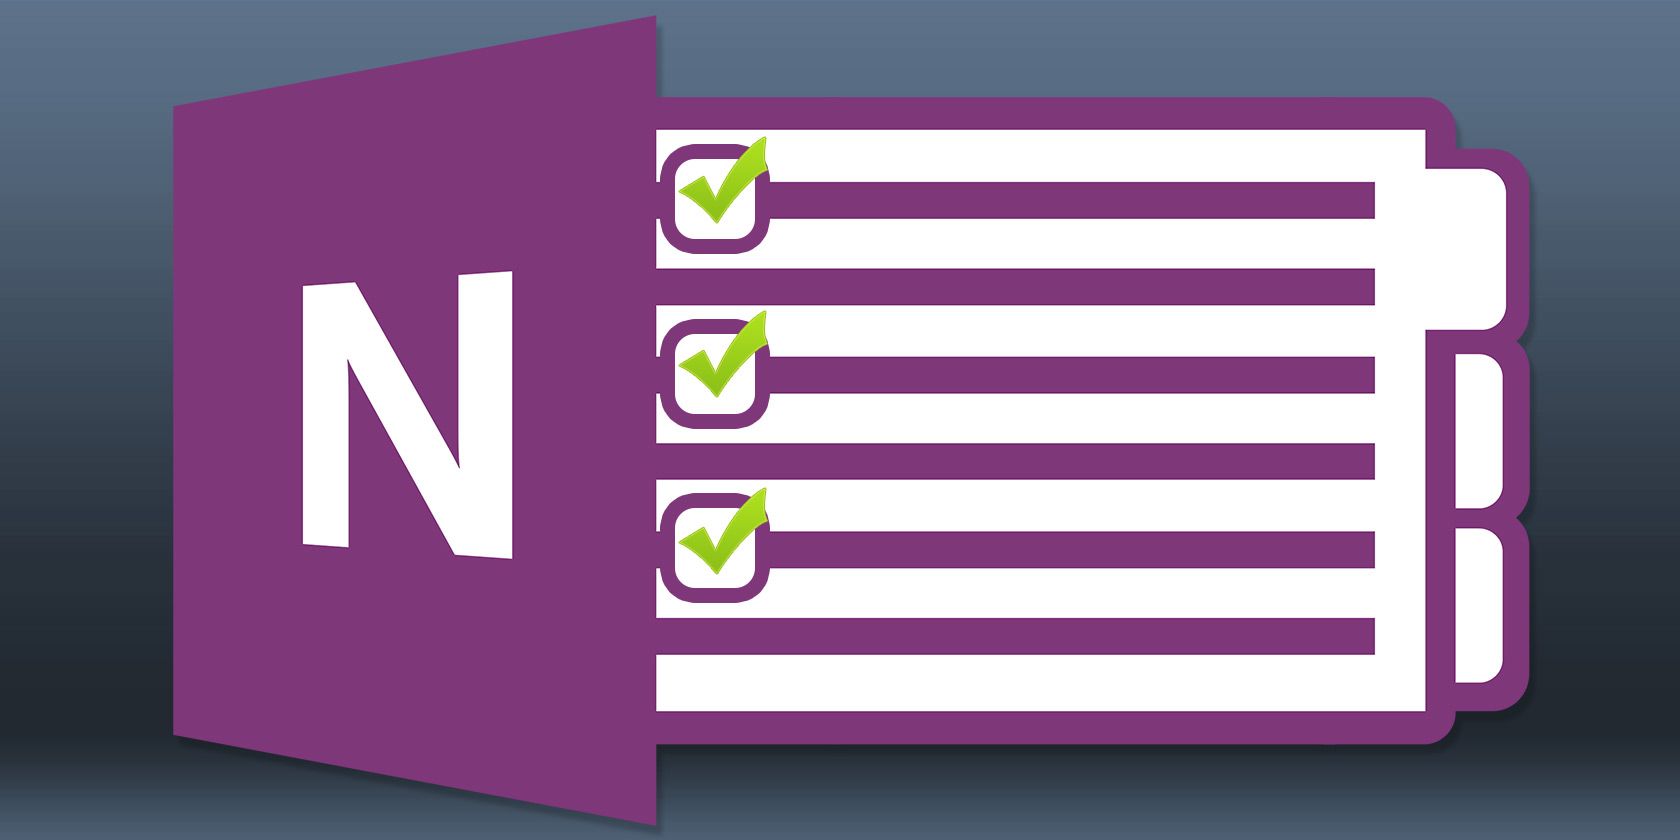 onenote todo list with dates